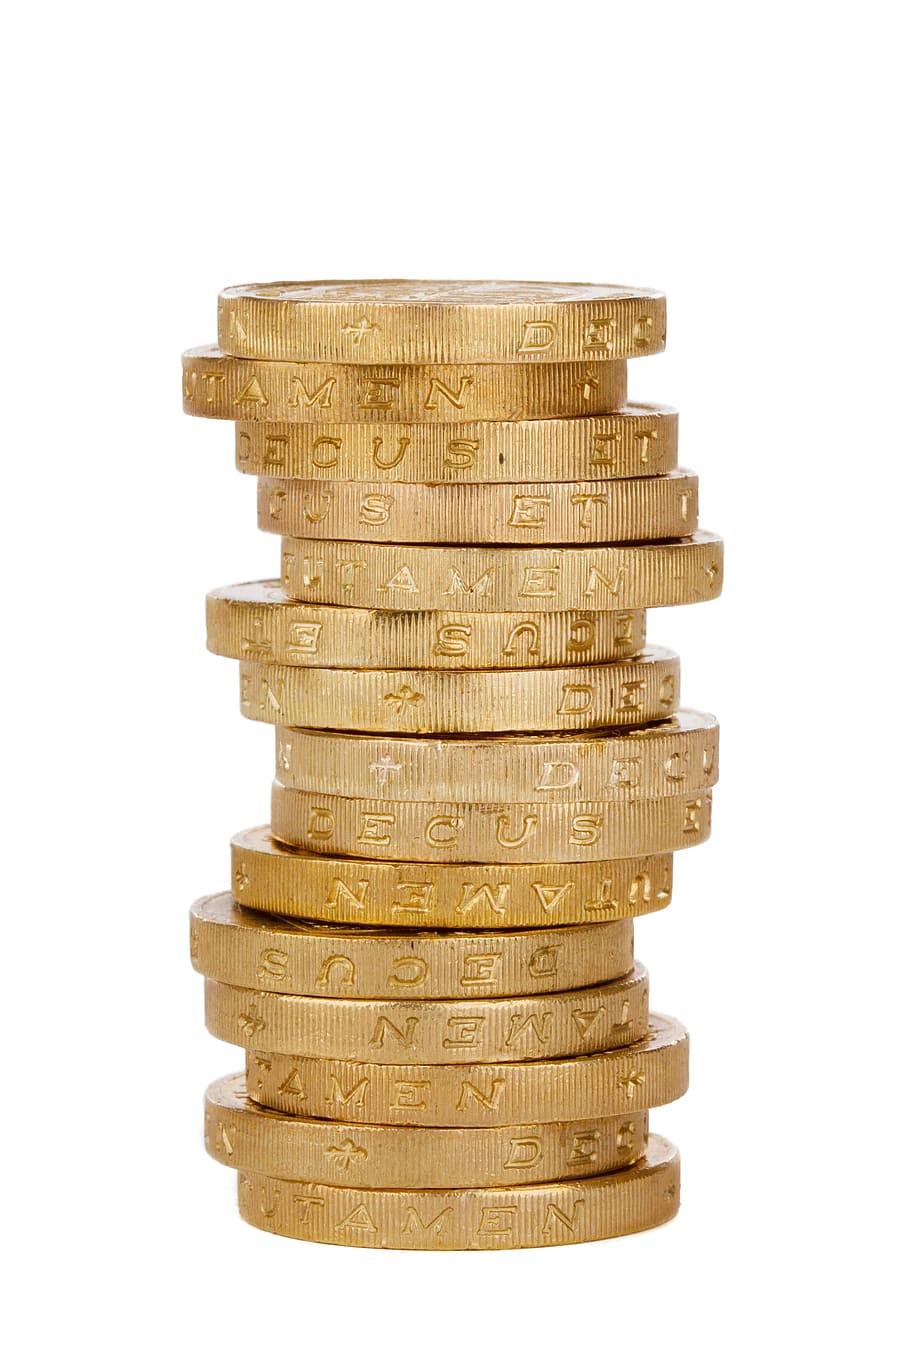 british, pound, coin, object, money, currency, business, stack, white background, studio shot